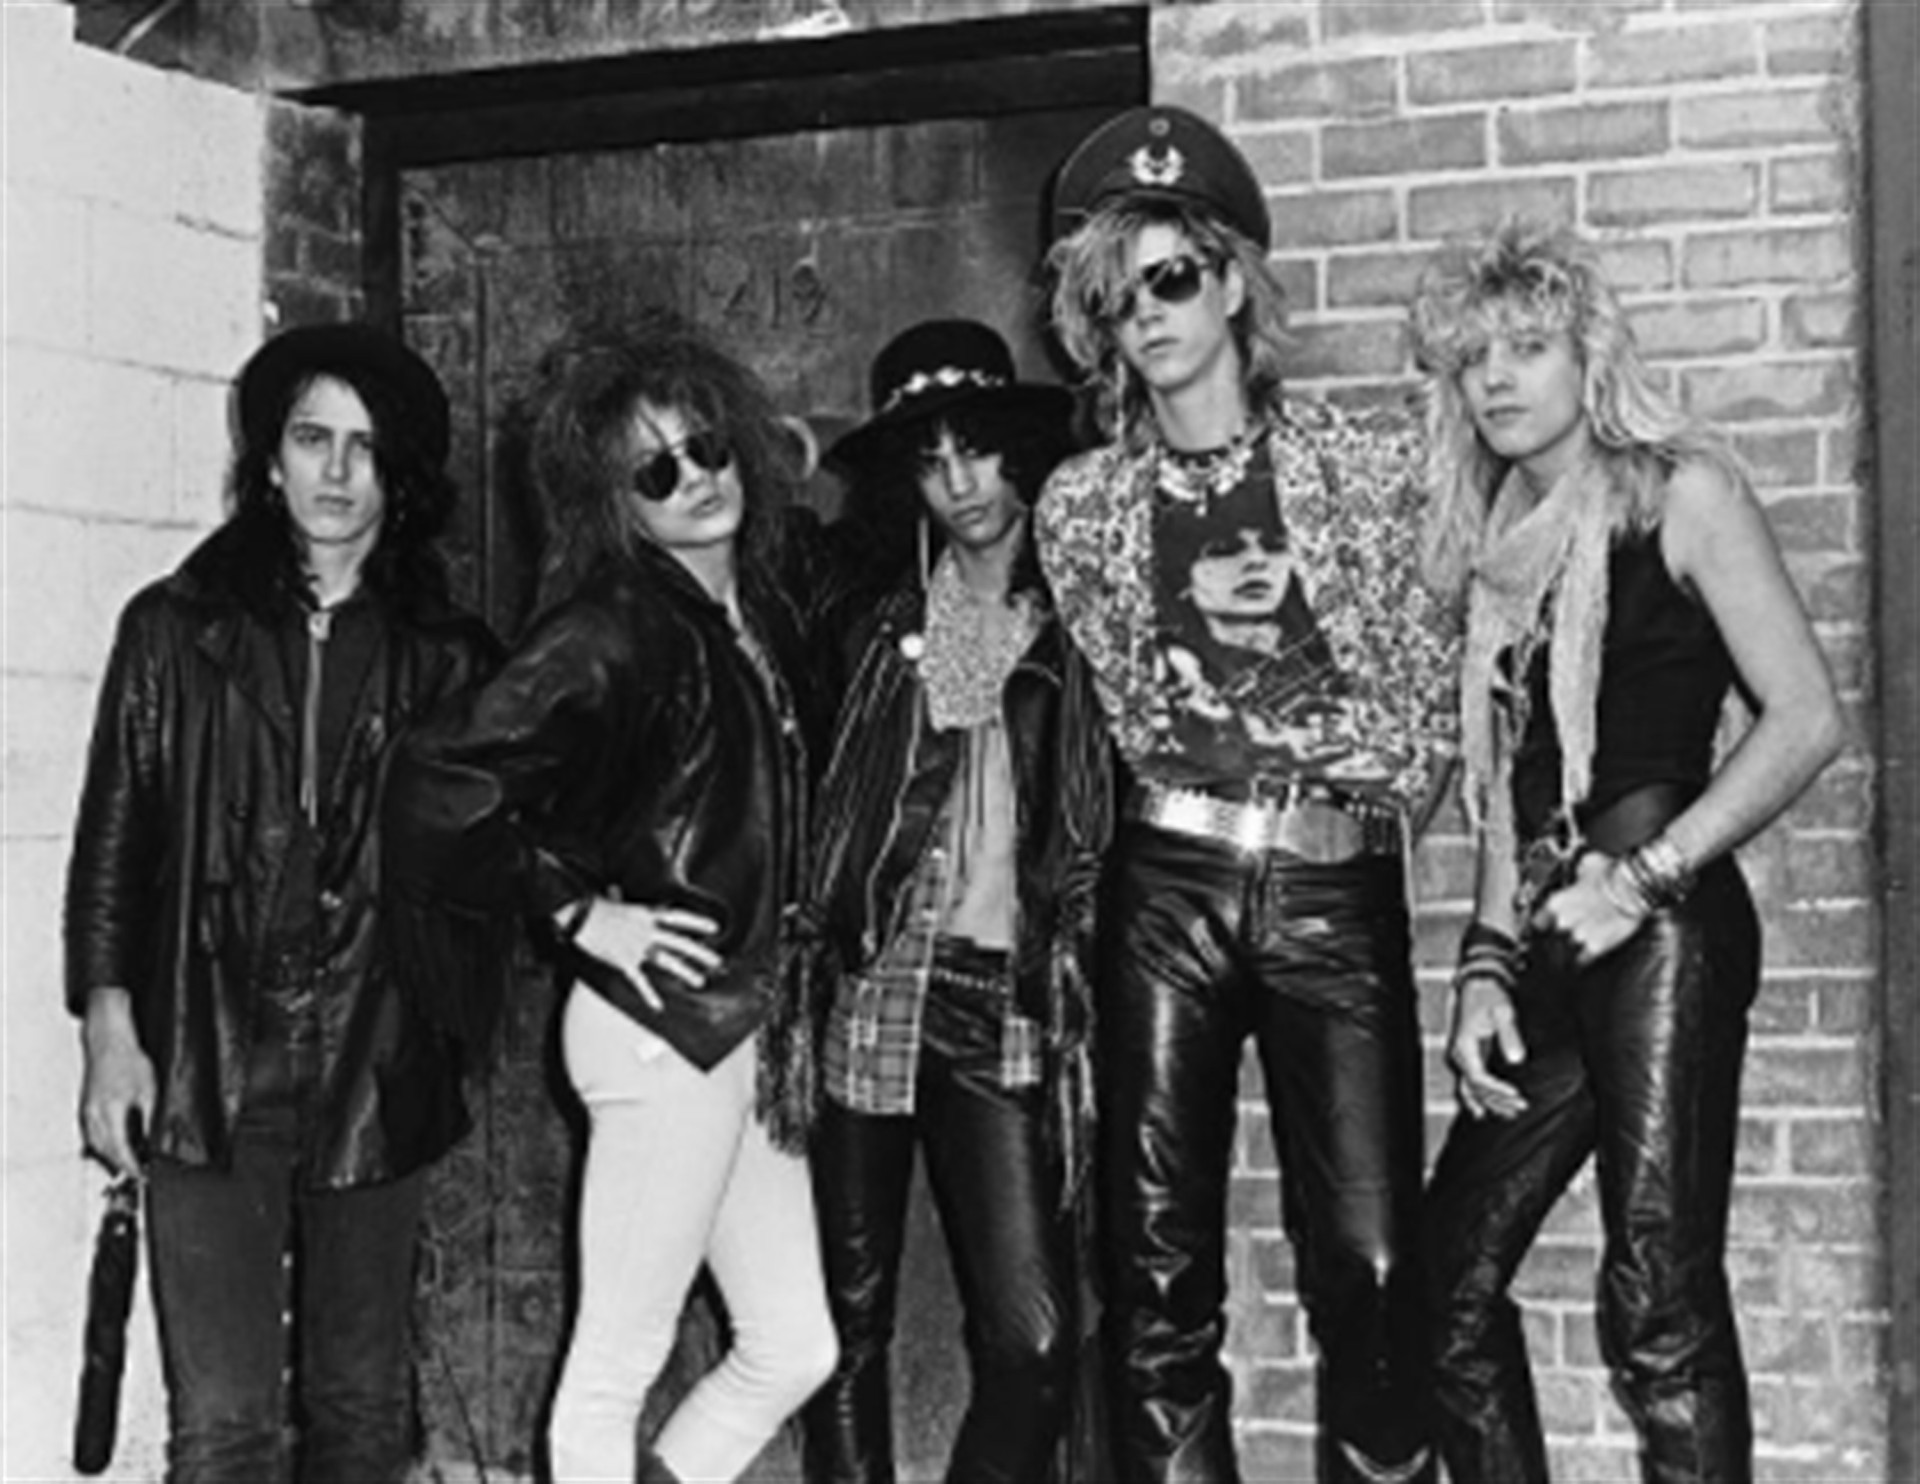 <p>According to the Los Angeles Times, Rose is widely known as one of the most unpredictable figures in rock 'n' roll. Slash, Izzy Stradlin, Duff McKagan, Gilby Clarke, Steven Adler, and Matt Sorum all departed from the band due to conflicts with Rose.</p><p><a href="https://www.msn.com/en-us/community/channel/vid-7xx8mnucu55yw63we9va2gwr7uihbxwc68fxqp25x6tg4ftibpra?cvid=94631541bc0f4f89bfd59158d696ad7e">Follow us and access great exclusive content every day</a></p>